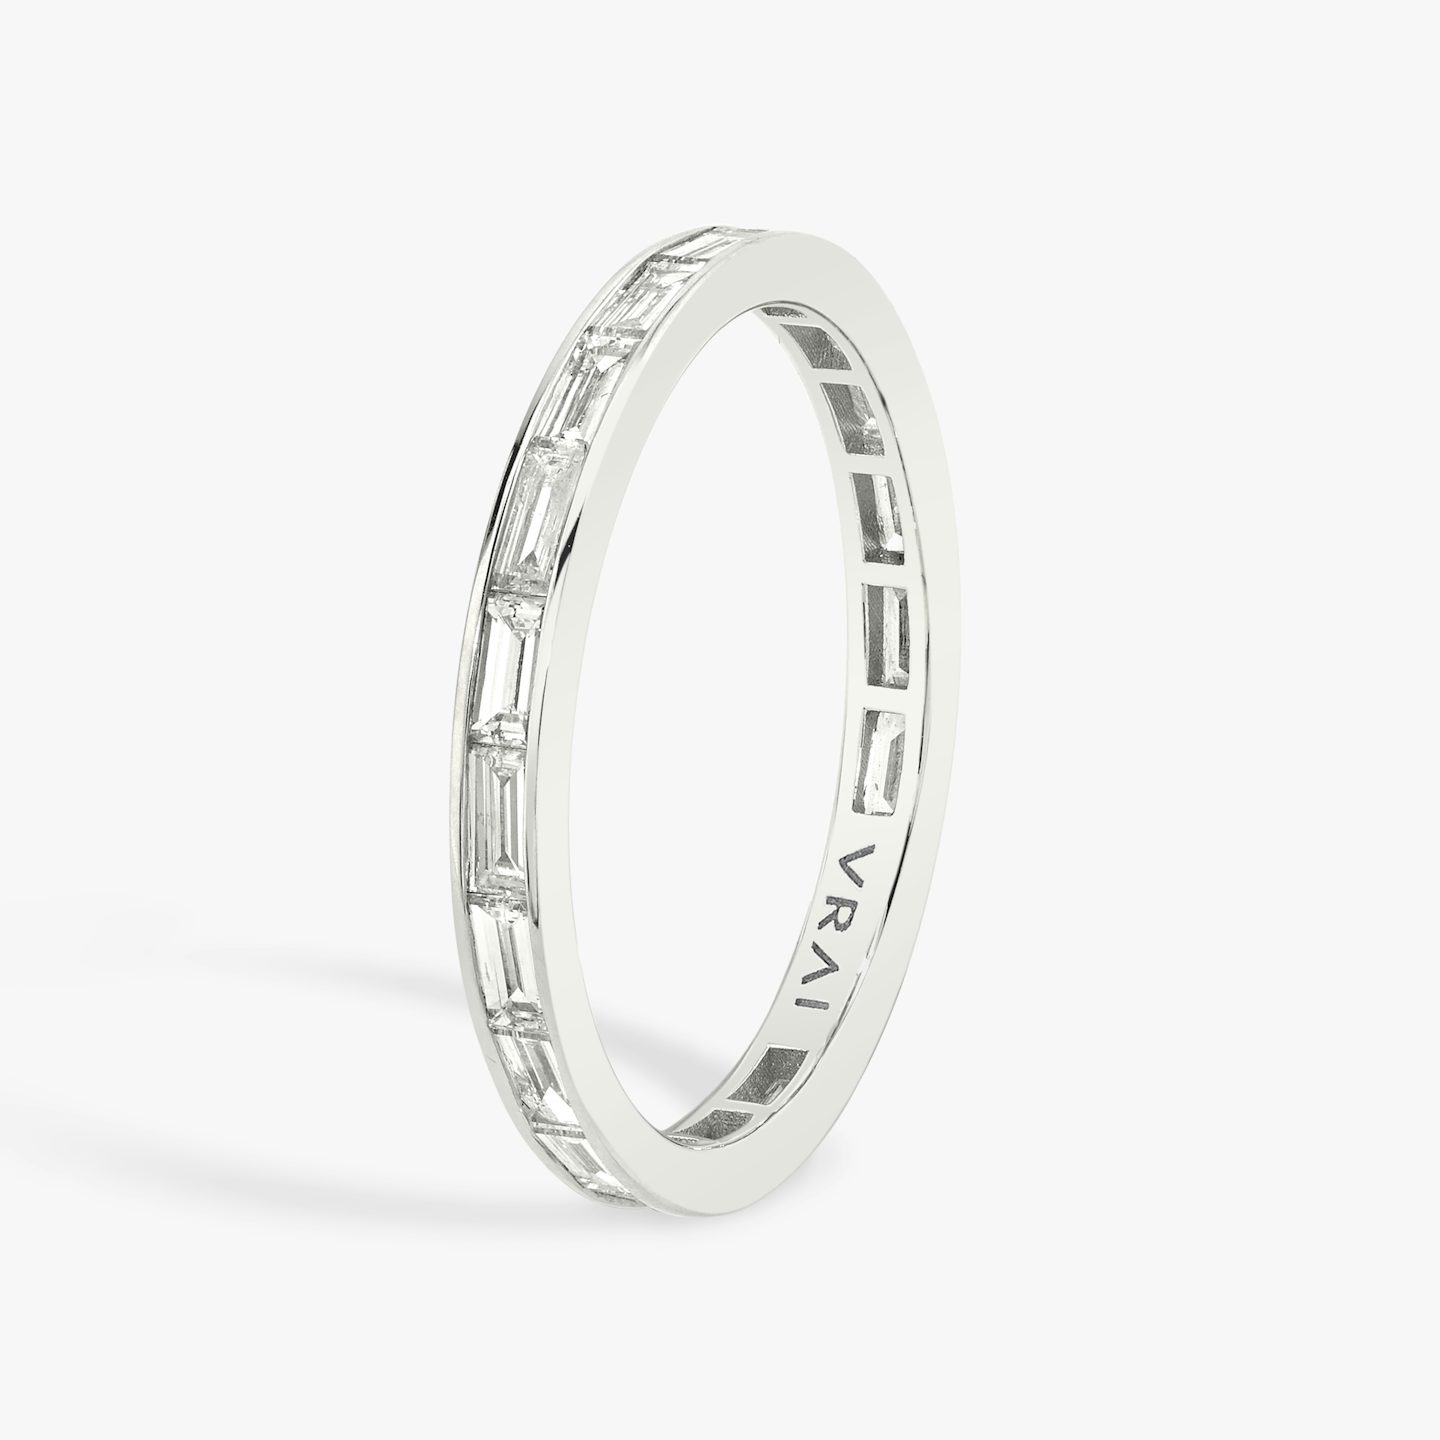 The Devotion Band | Baguette | Platinum | Band style: Full diamond | Band width: Large